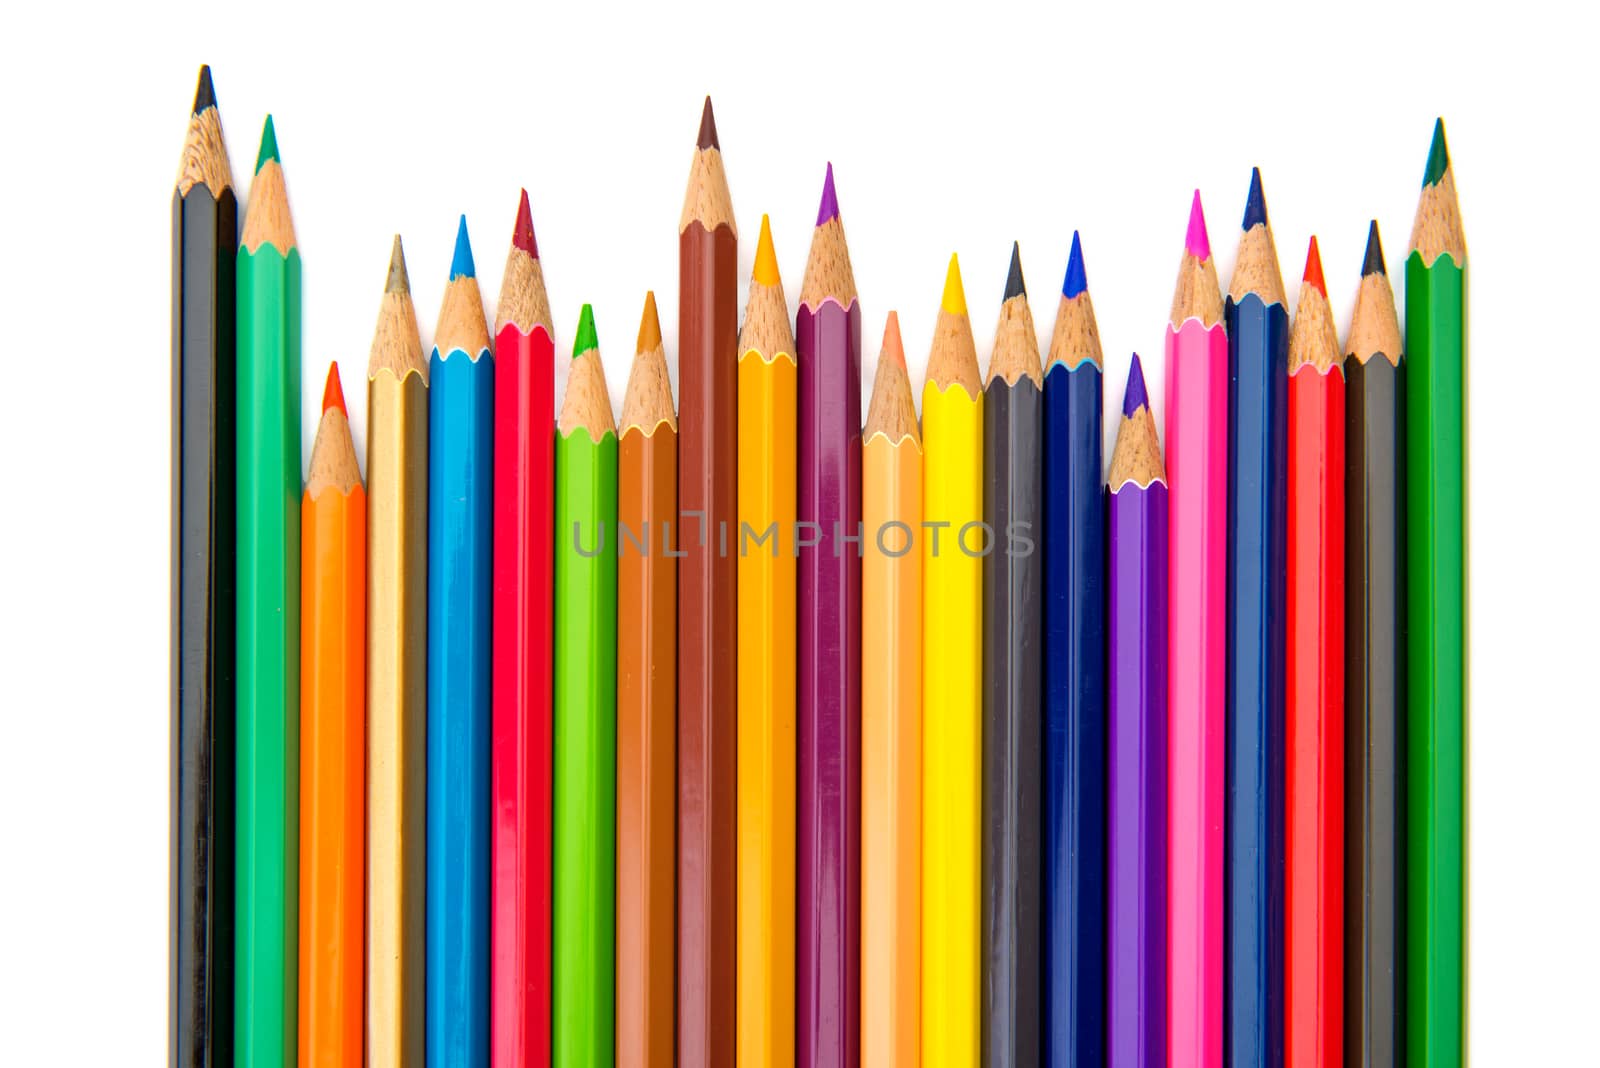 Color pencils isolated on a white background.